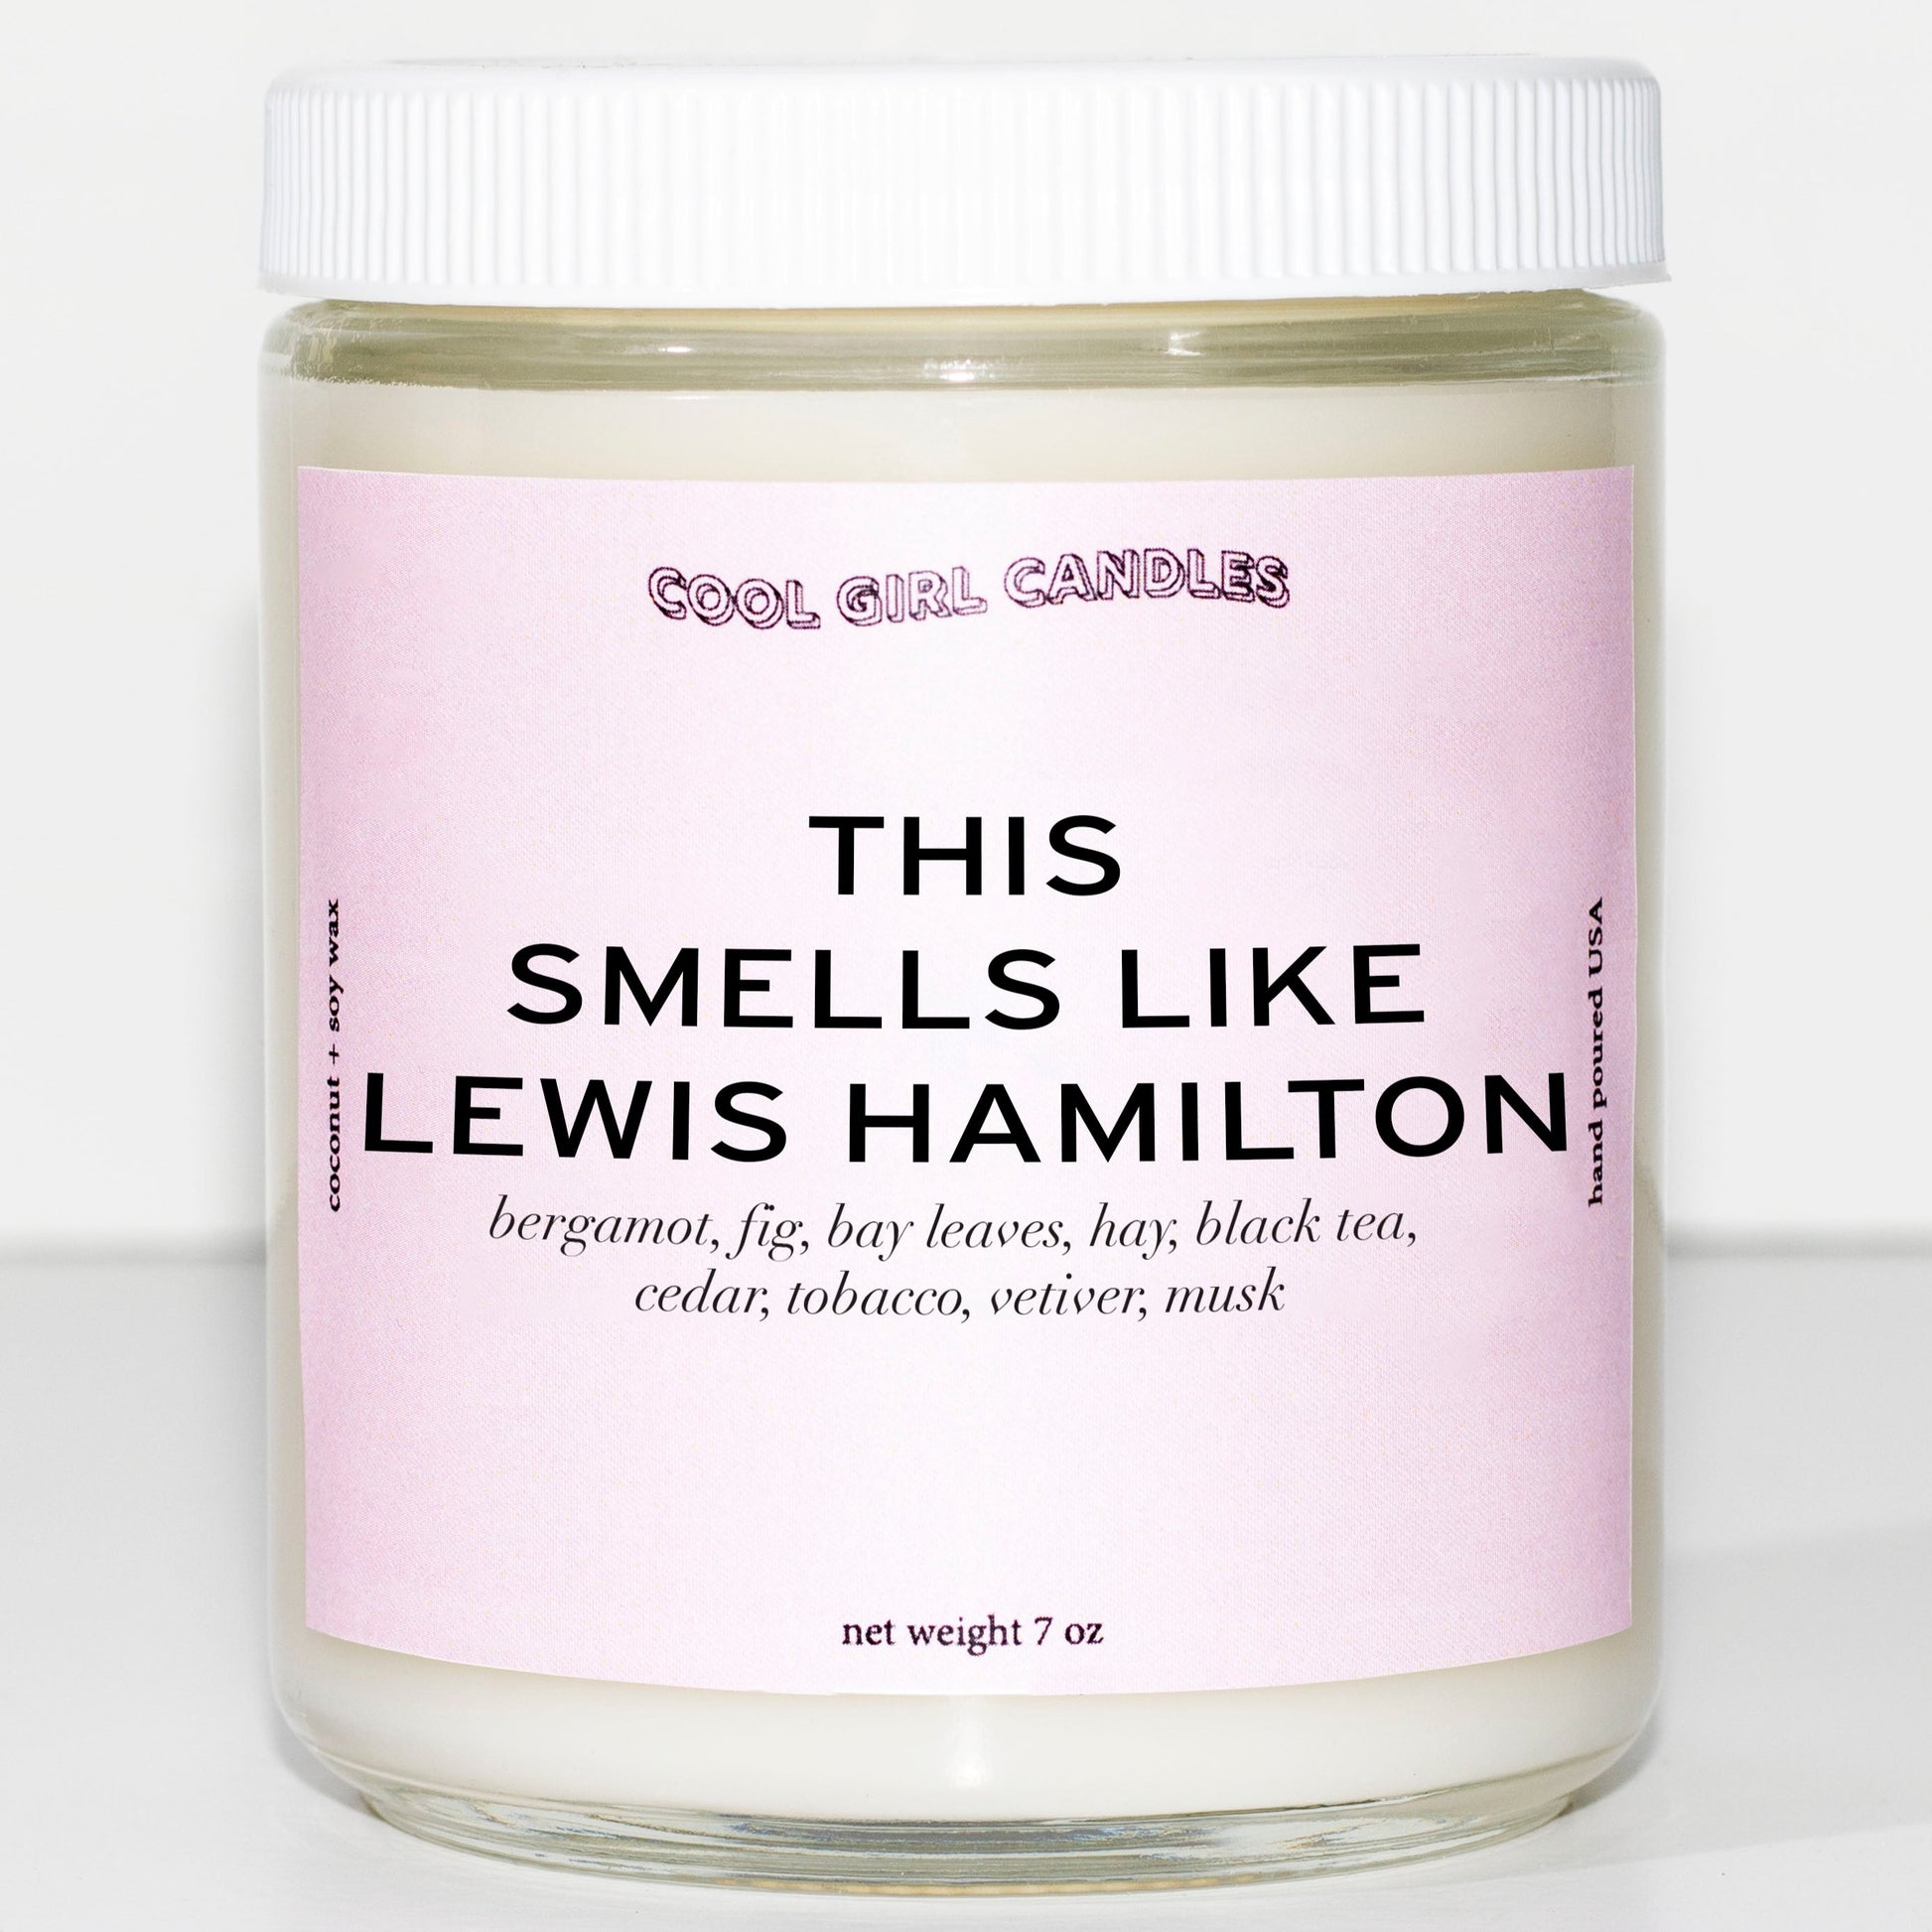 This smells like Lewis Hamilton candle. The perfect gift for Lewis Hamilton fans